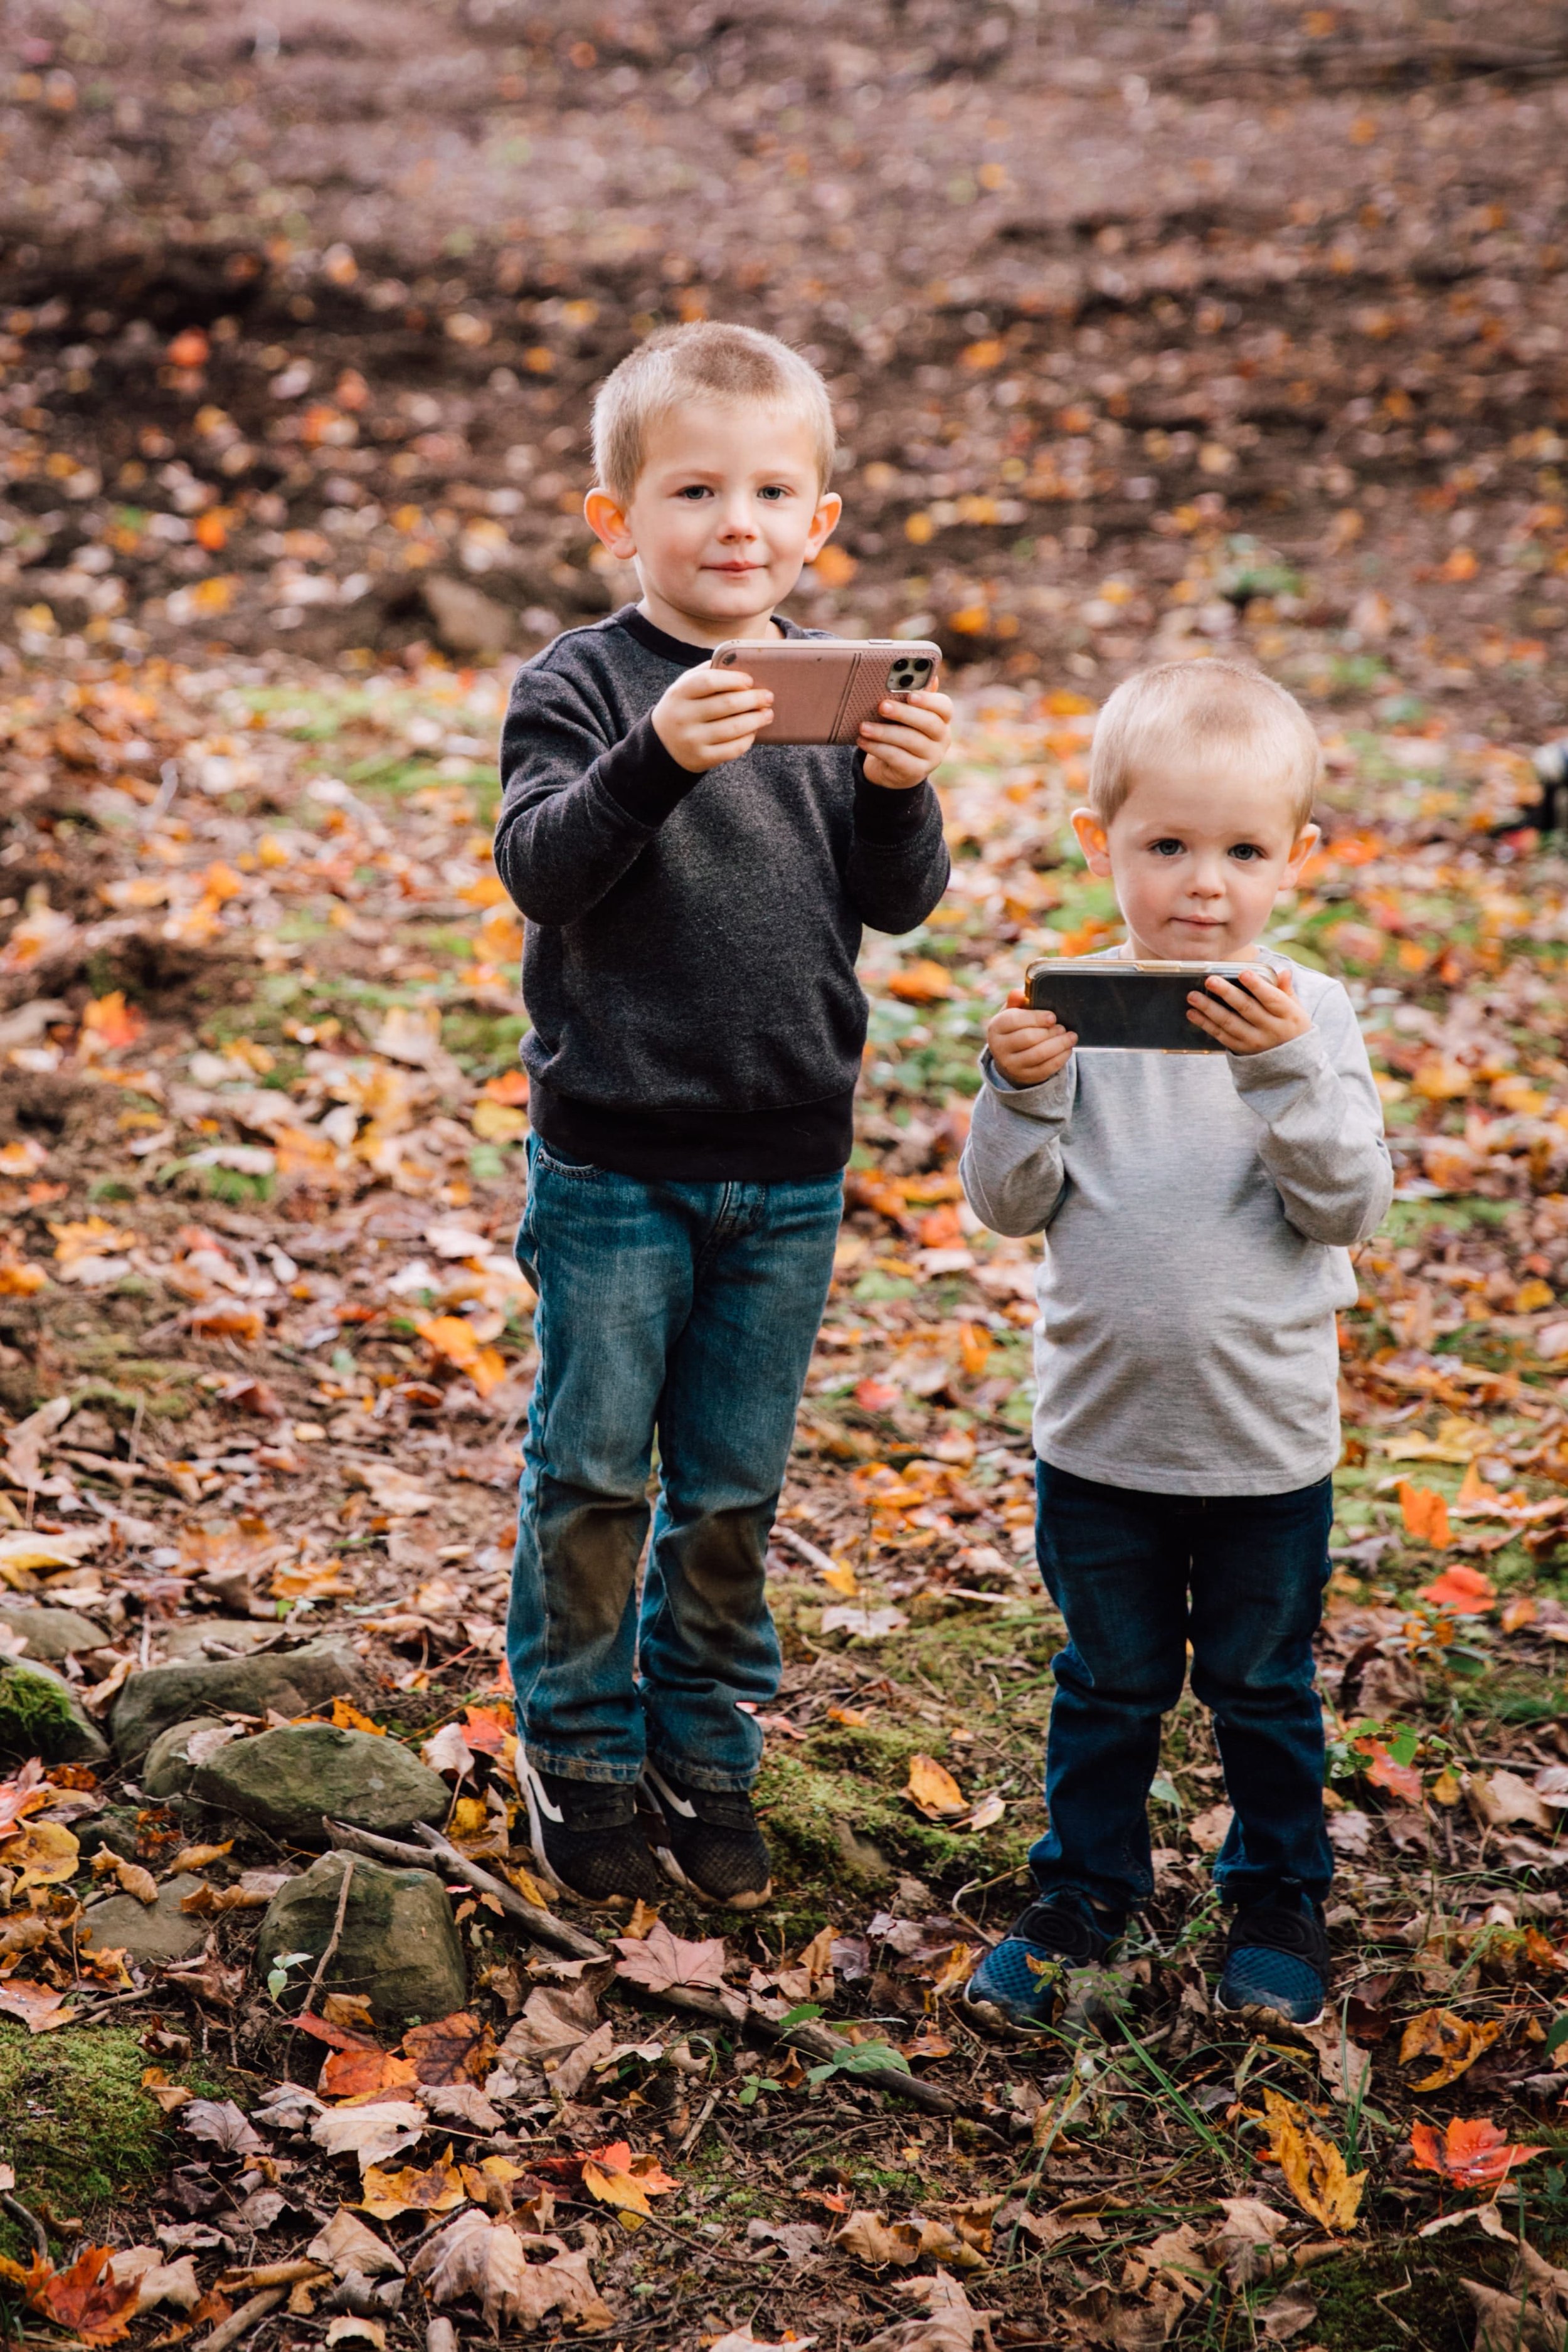  central new york photographer’s second shooters the couple’s sons stand with their parents phones taking pictures during their parents backyard photoshoot 